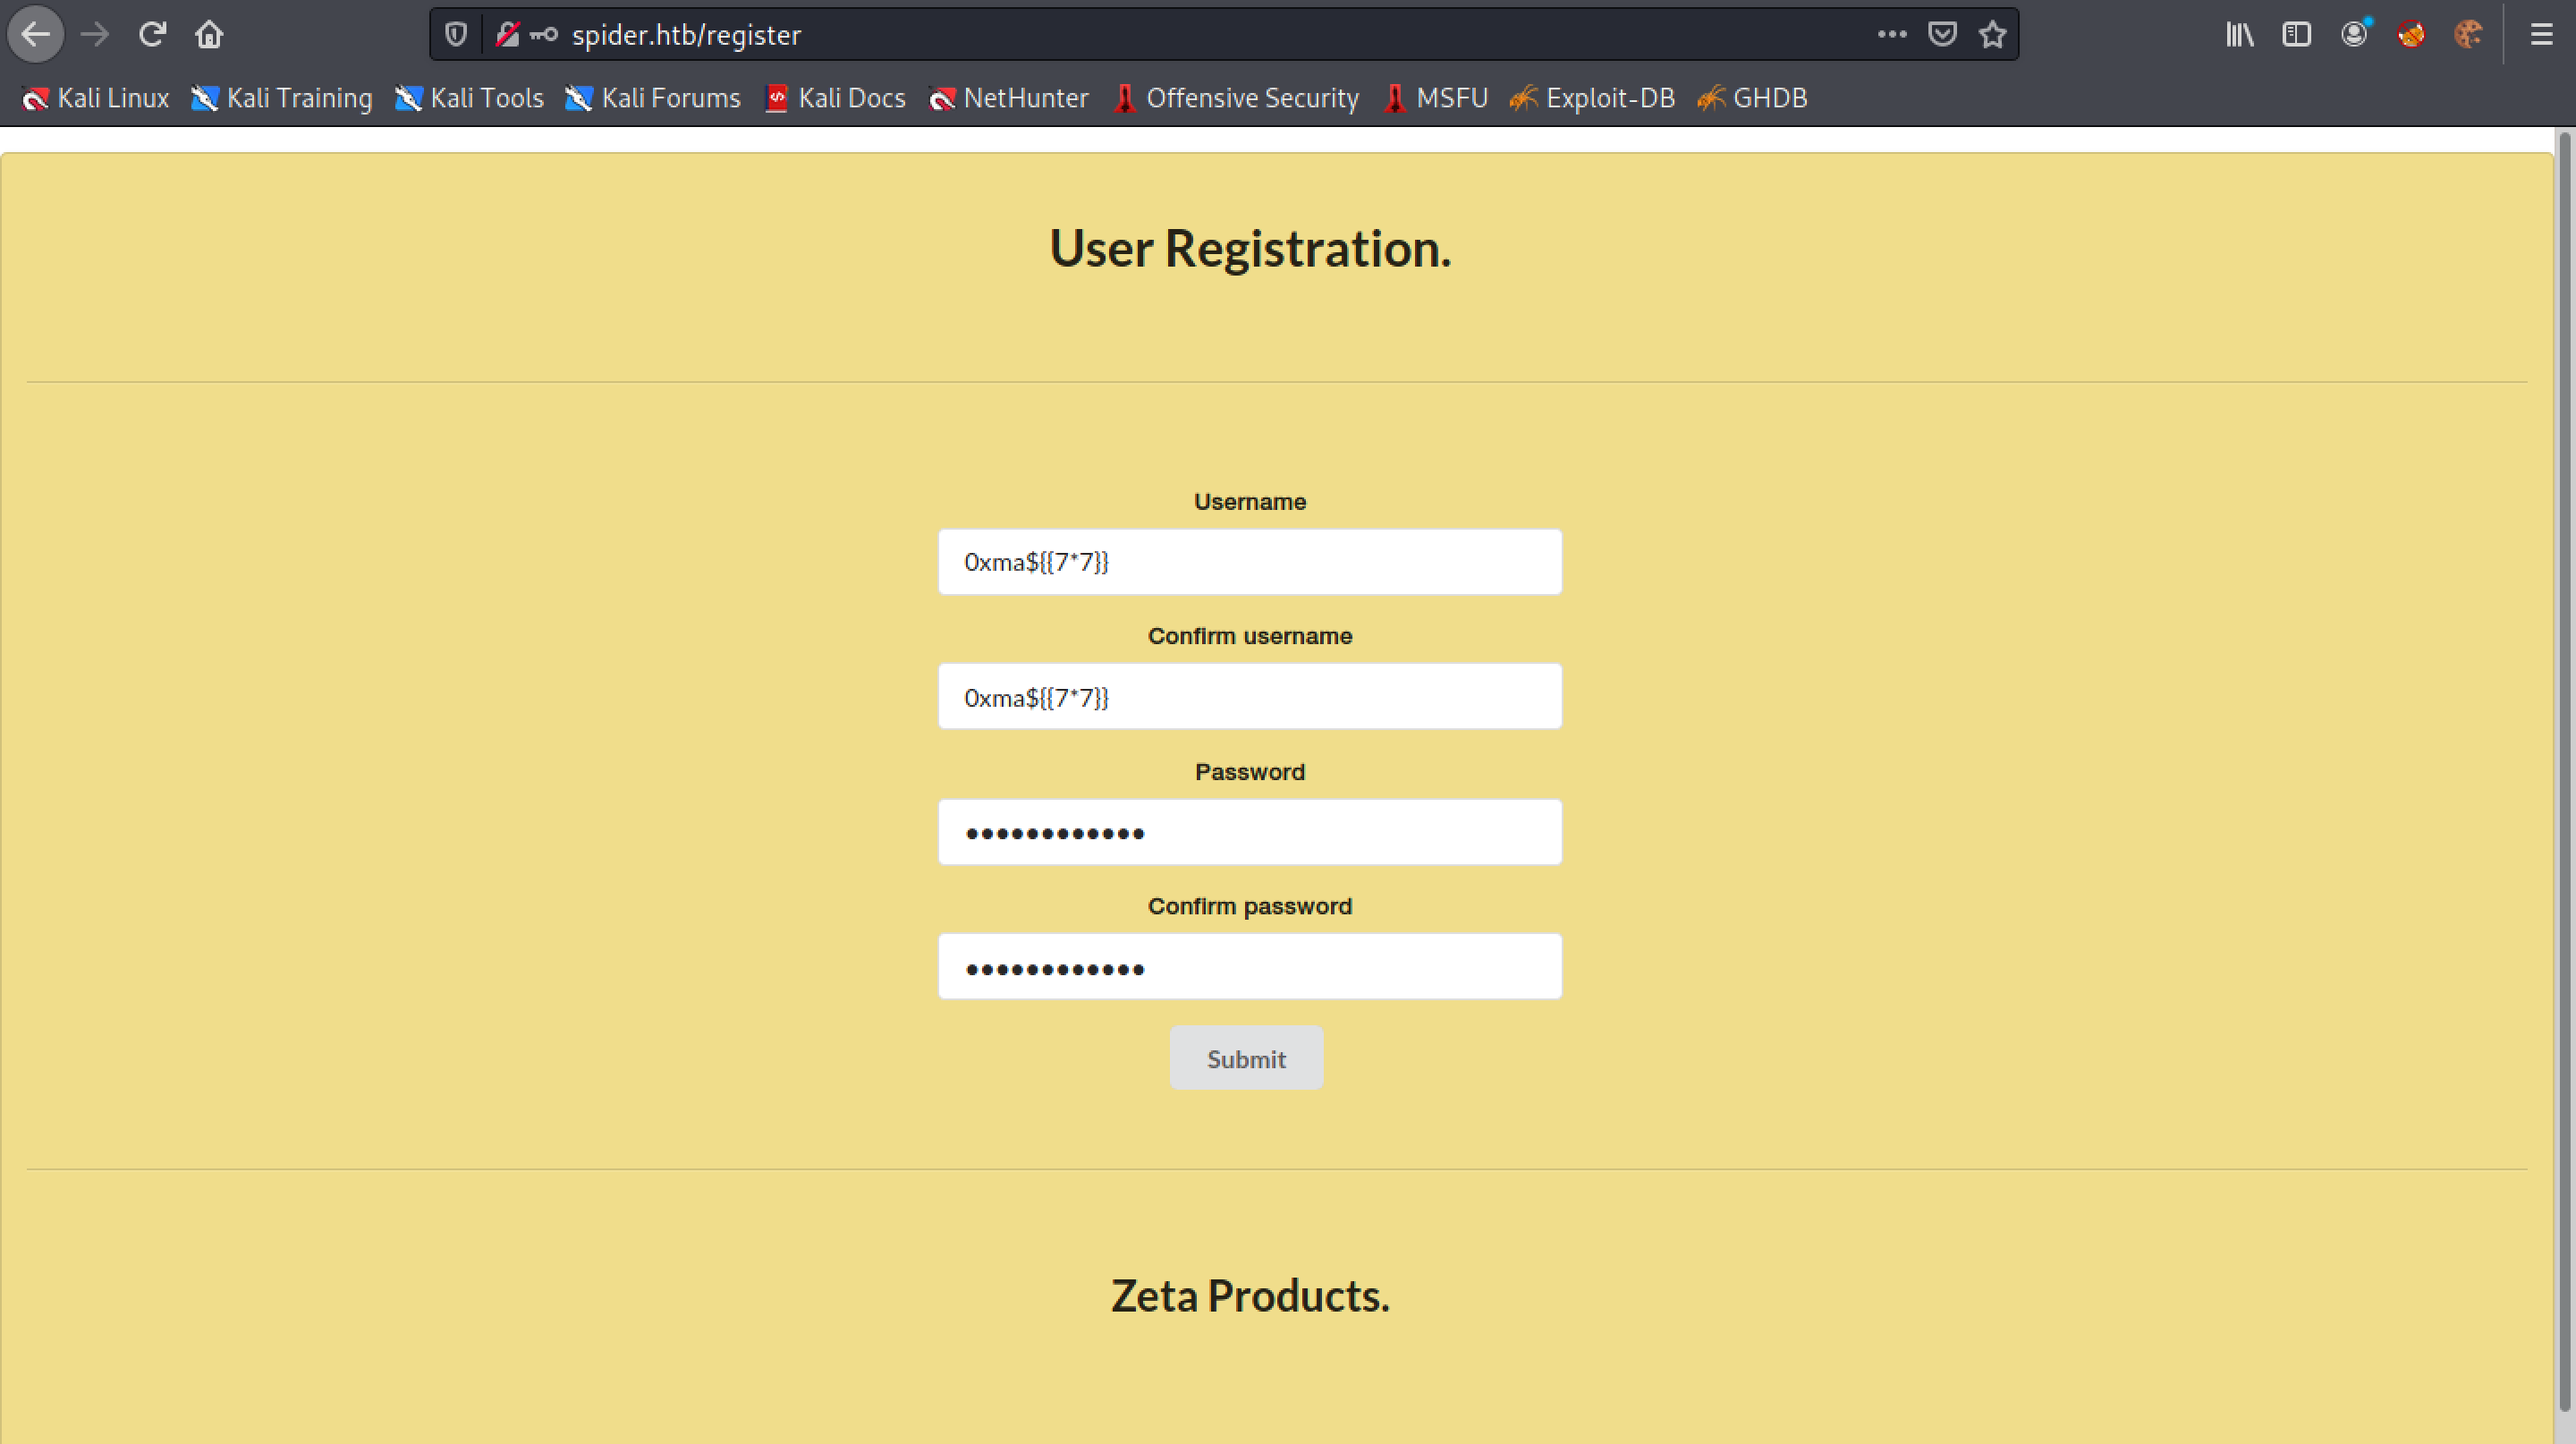 Registering a username with SSTI payload.